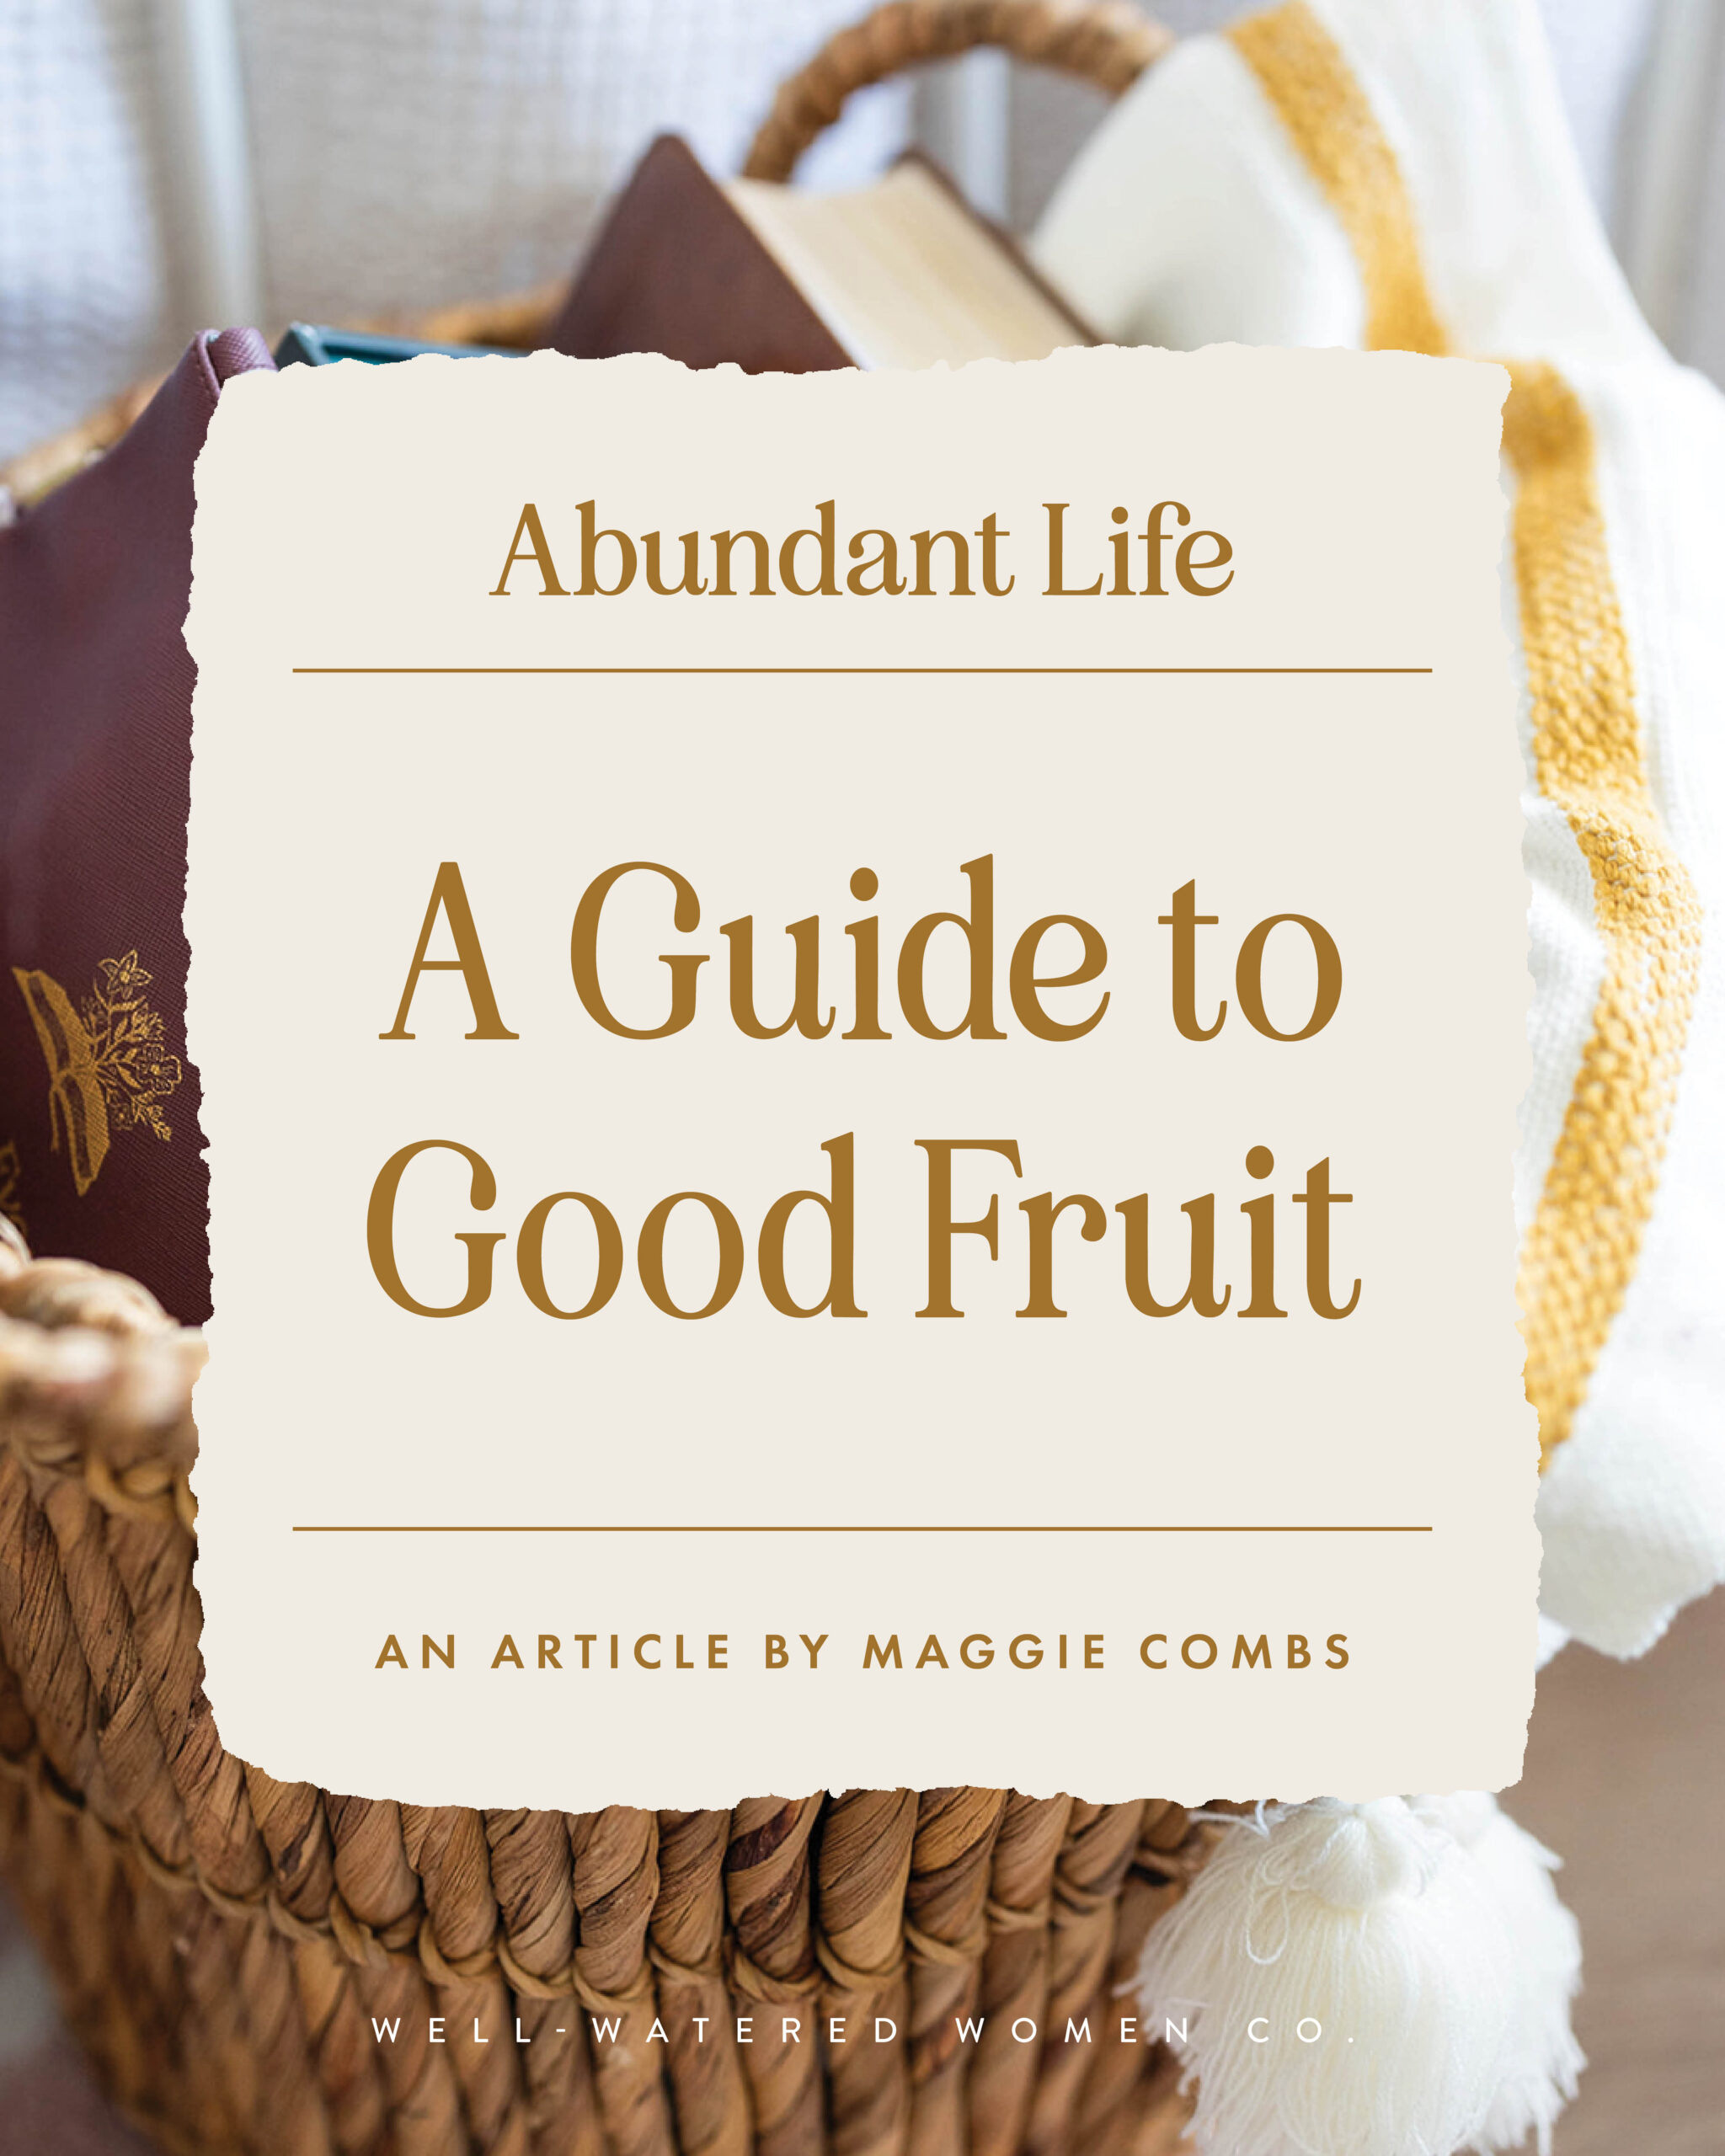 A Guide to Good Fruit - an article from Well-Watered Women